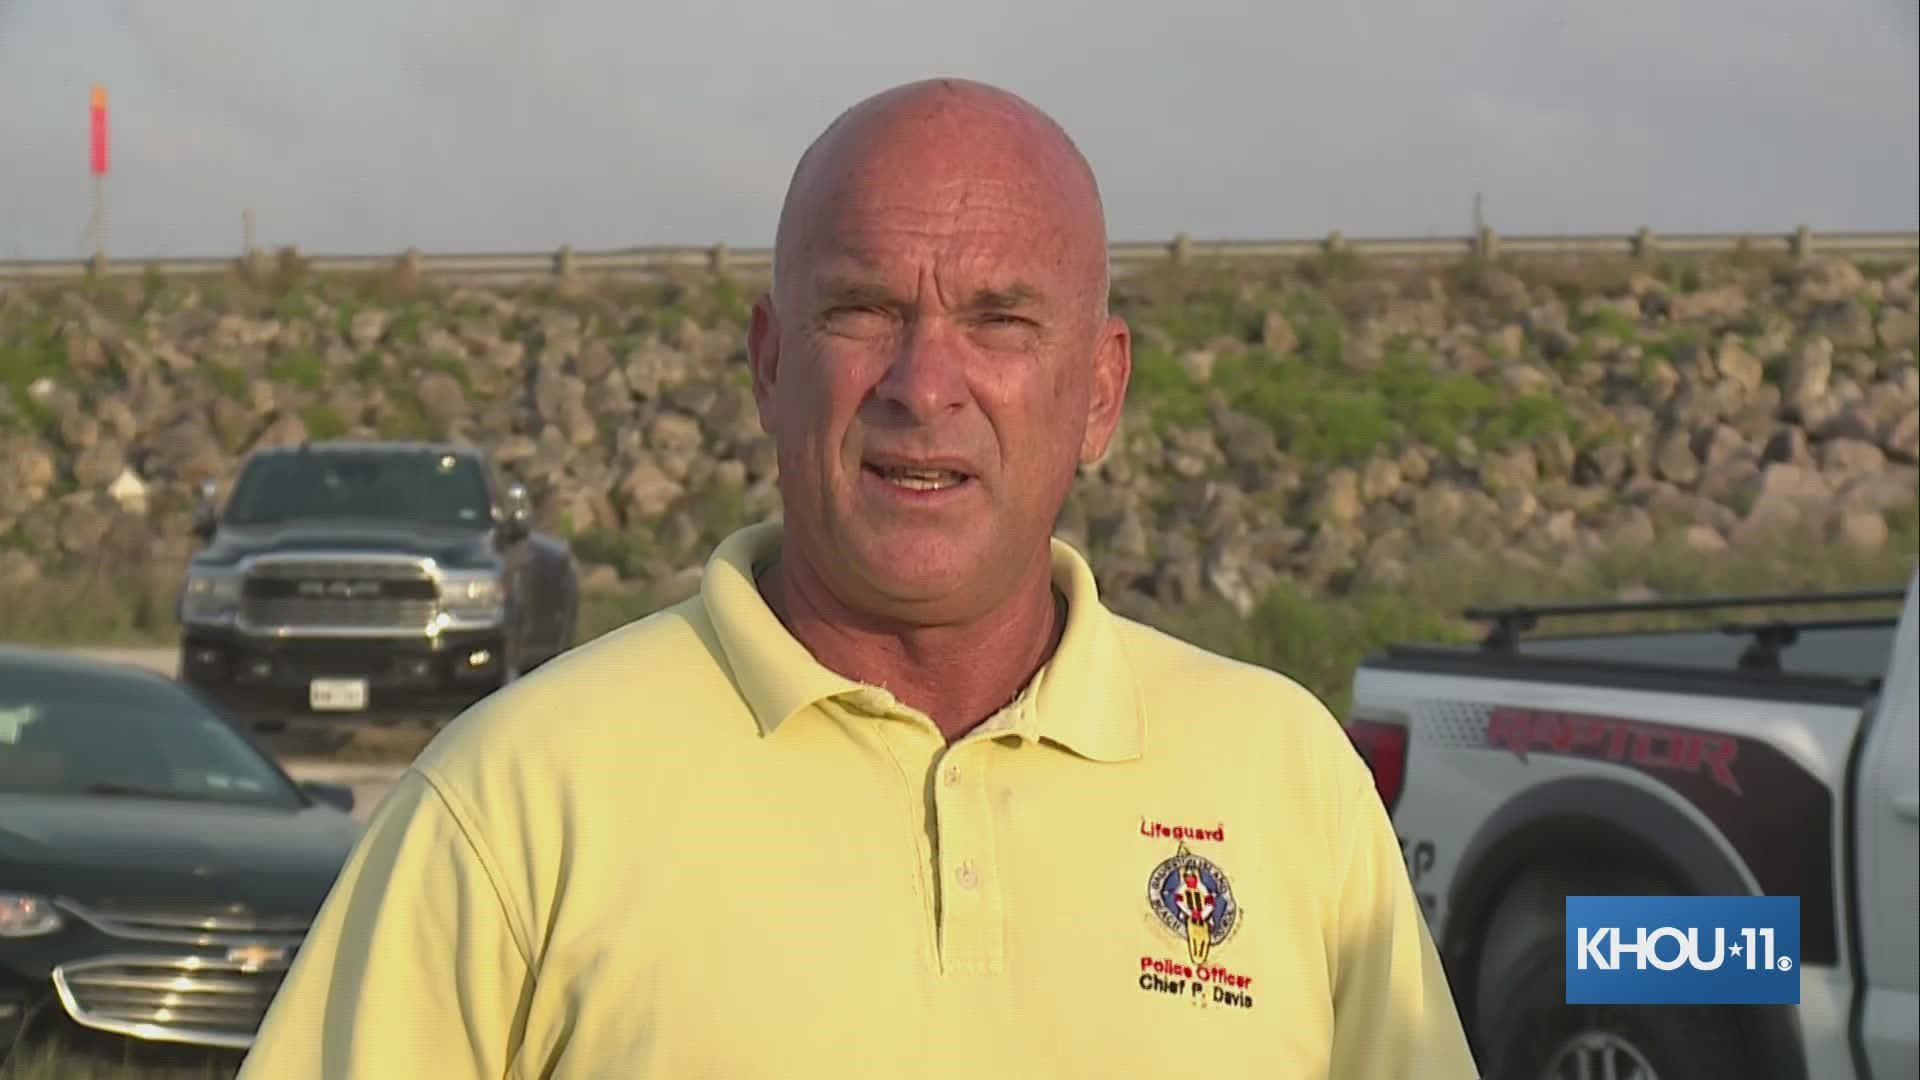 Galveston Island Beach Patrol Chief Peter Davis gave an update after a body was recovered near where a 17-year-old went missing while fishing near San Luis Pass.